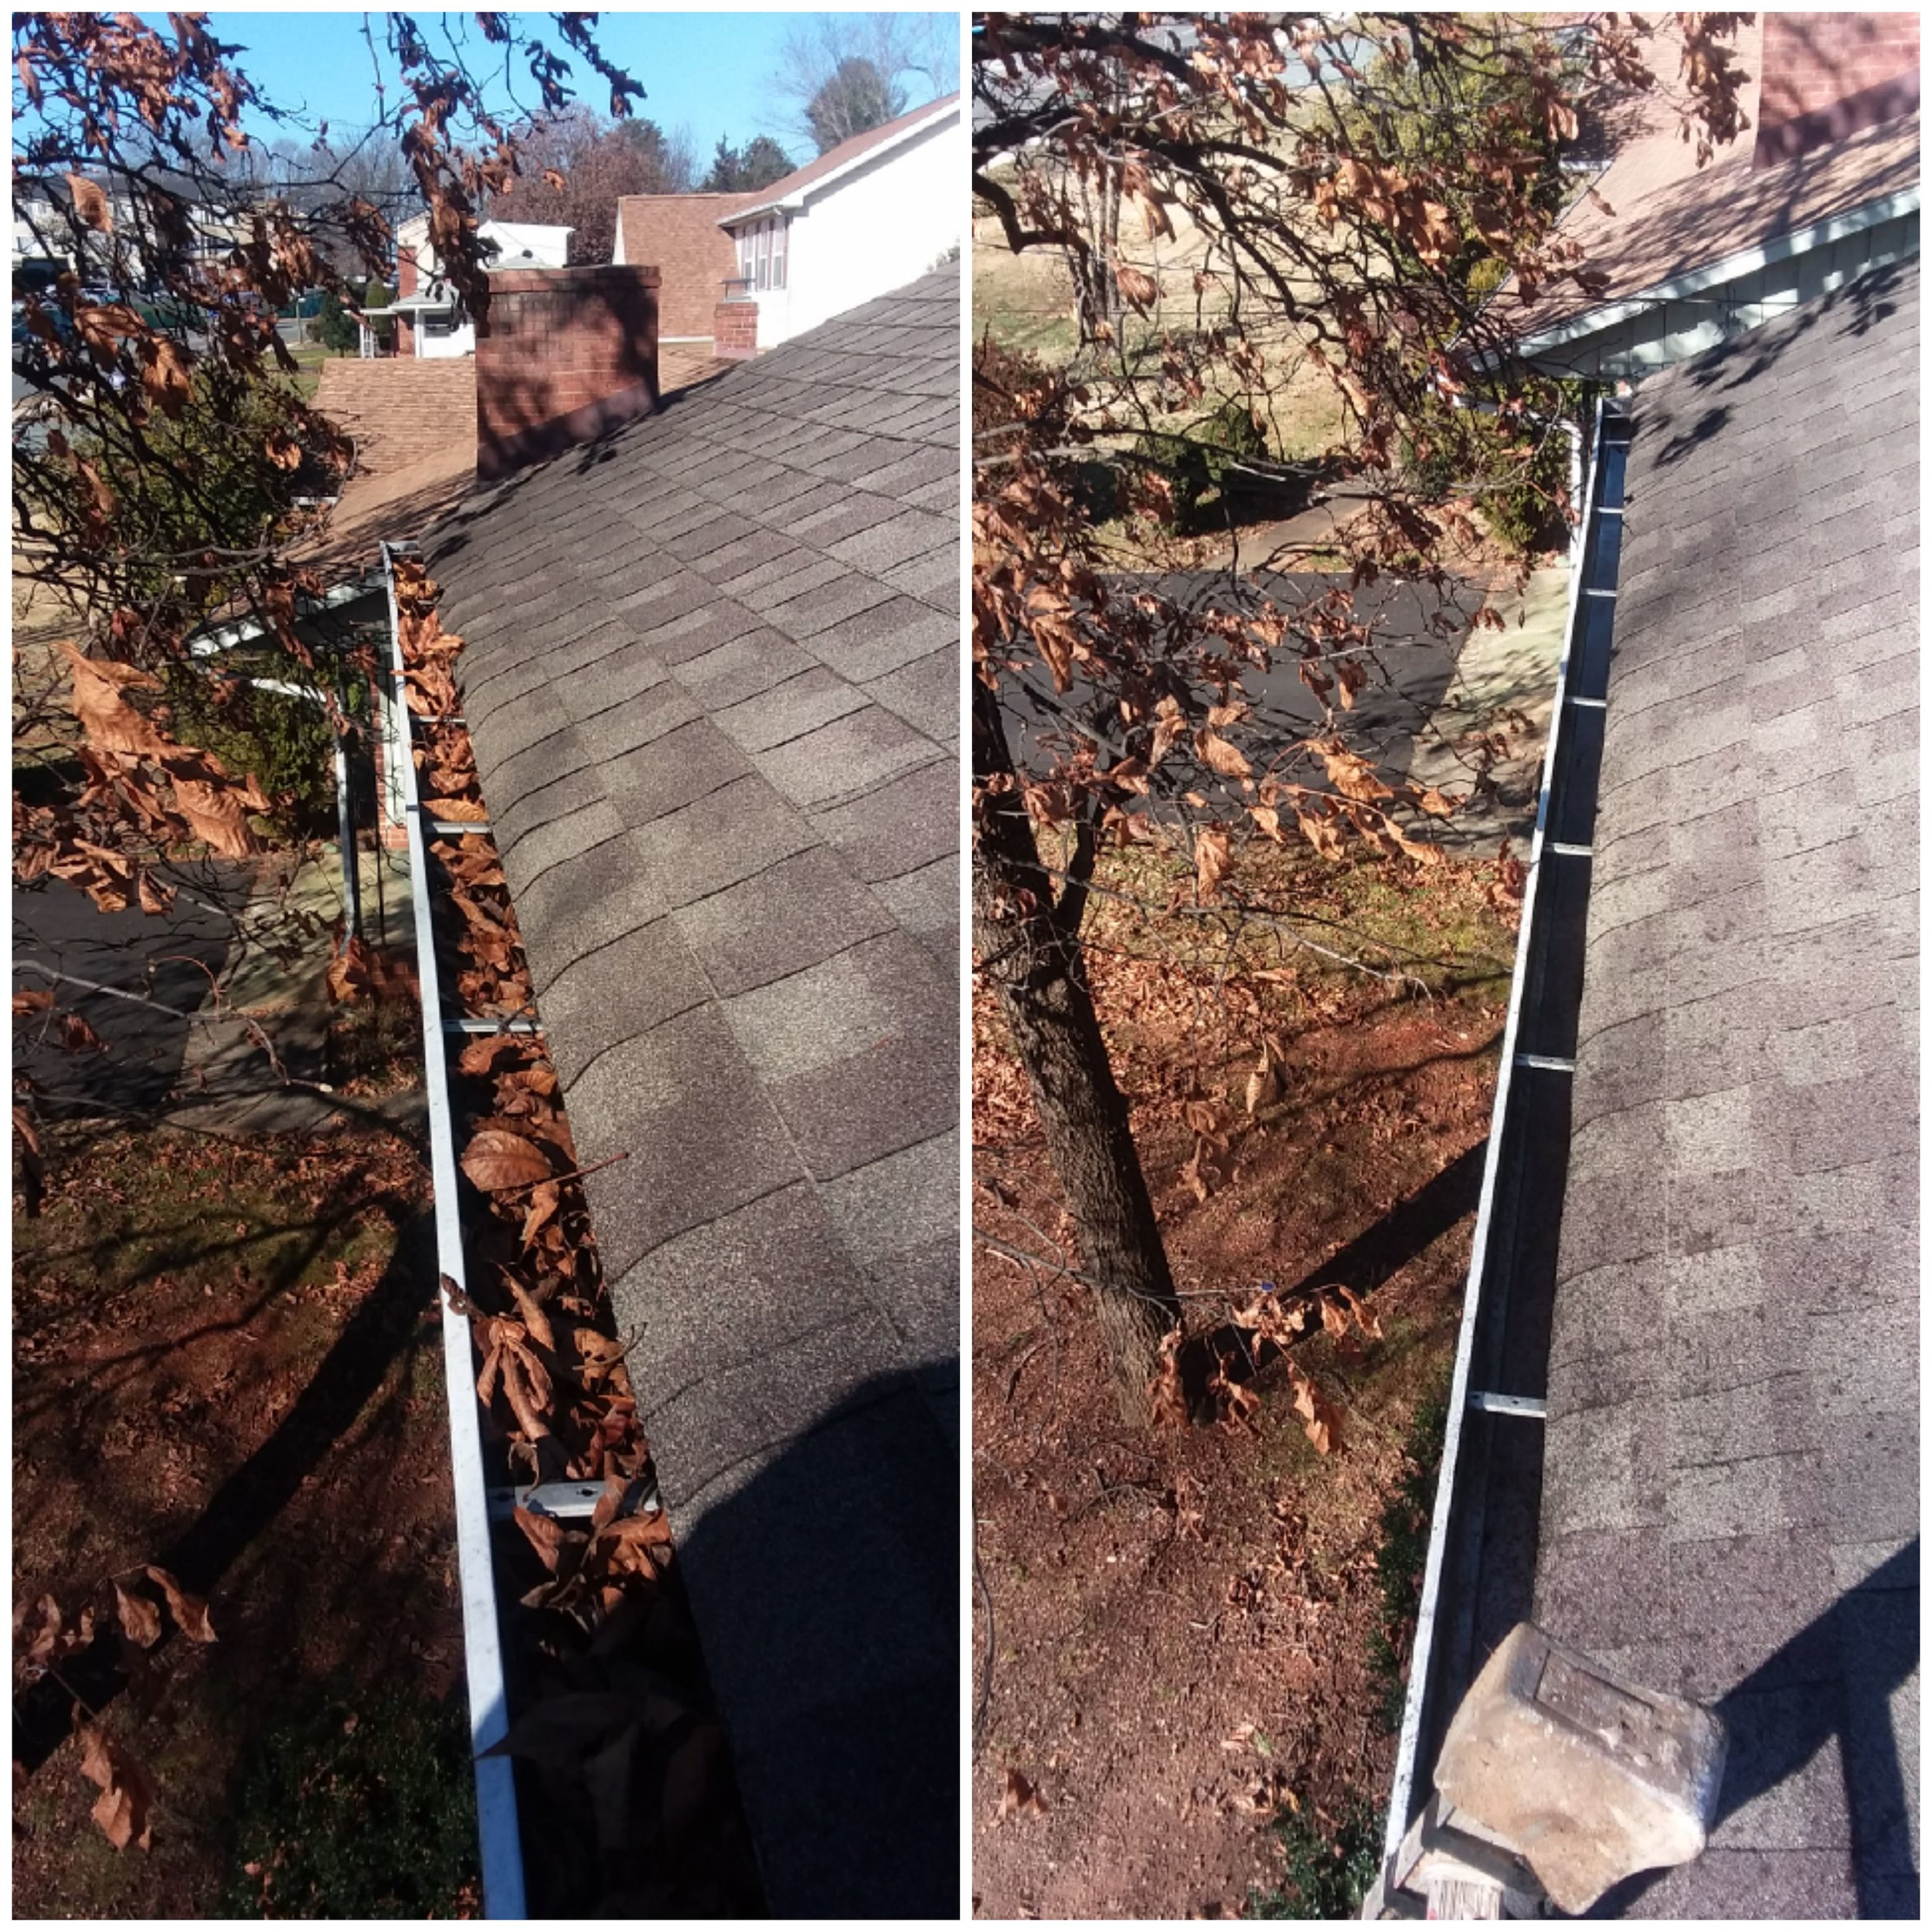 Image from the roof in Charlottesville showing a clogged gutter full of leaves next to an image of a gutter that is clean and ready for water flow.